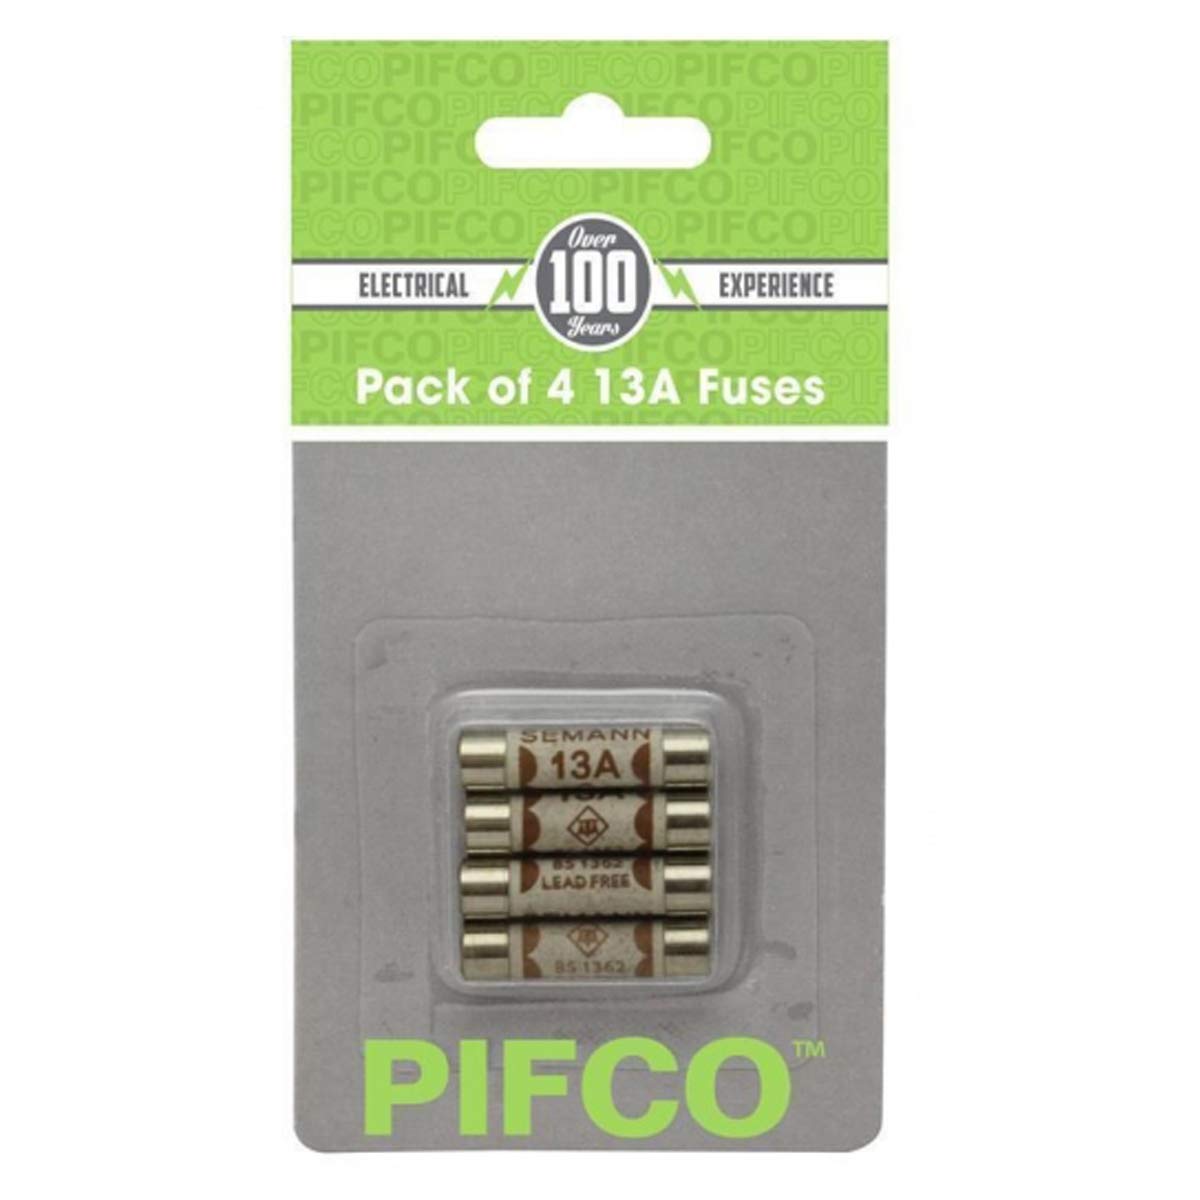 PIFCO PACK OF 4 3A FUSES, APPLIANCES WATTAGE: 250-750W